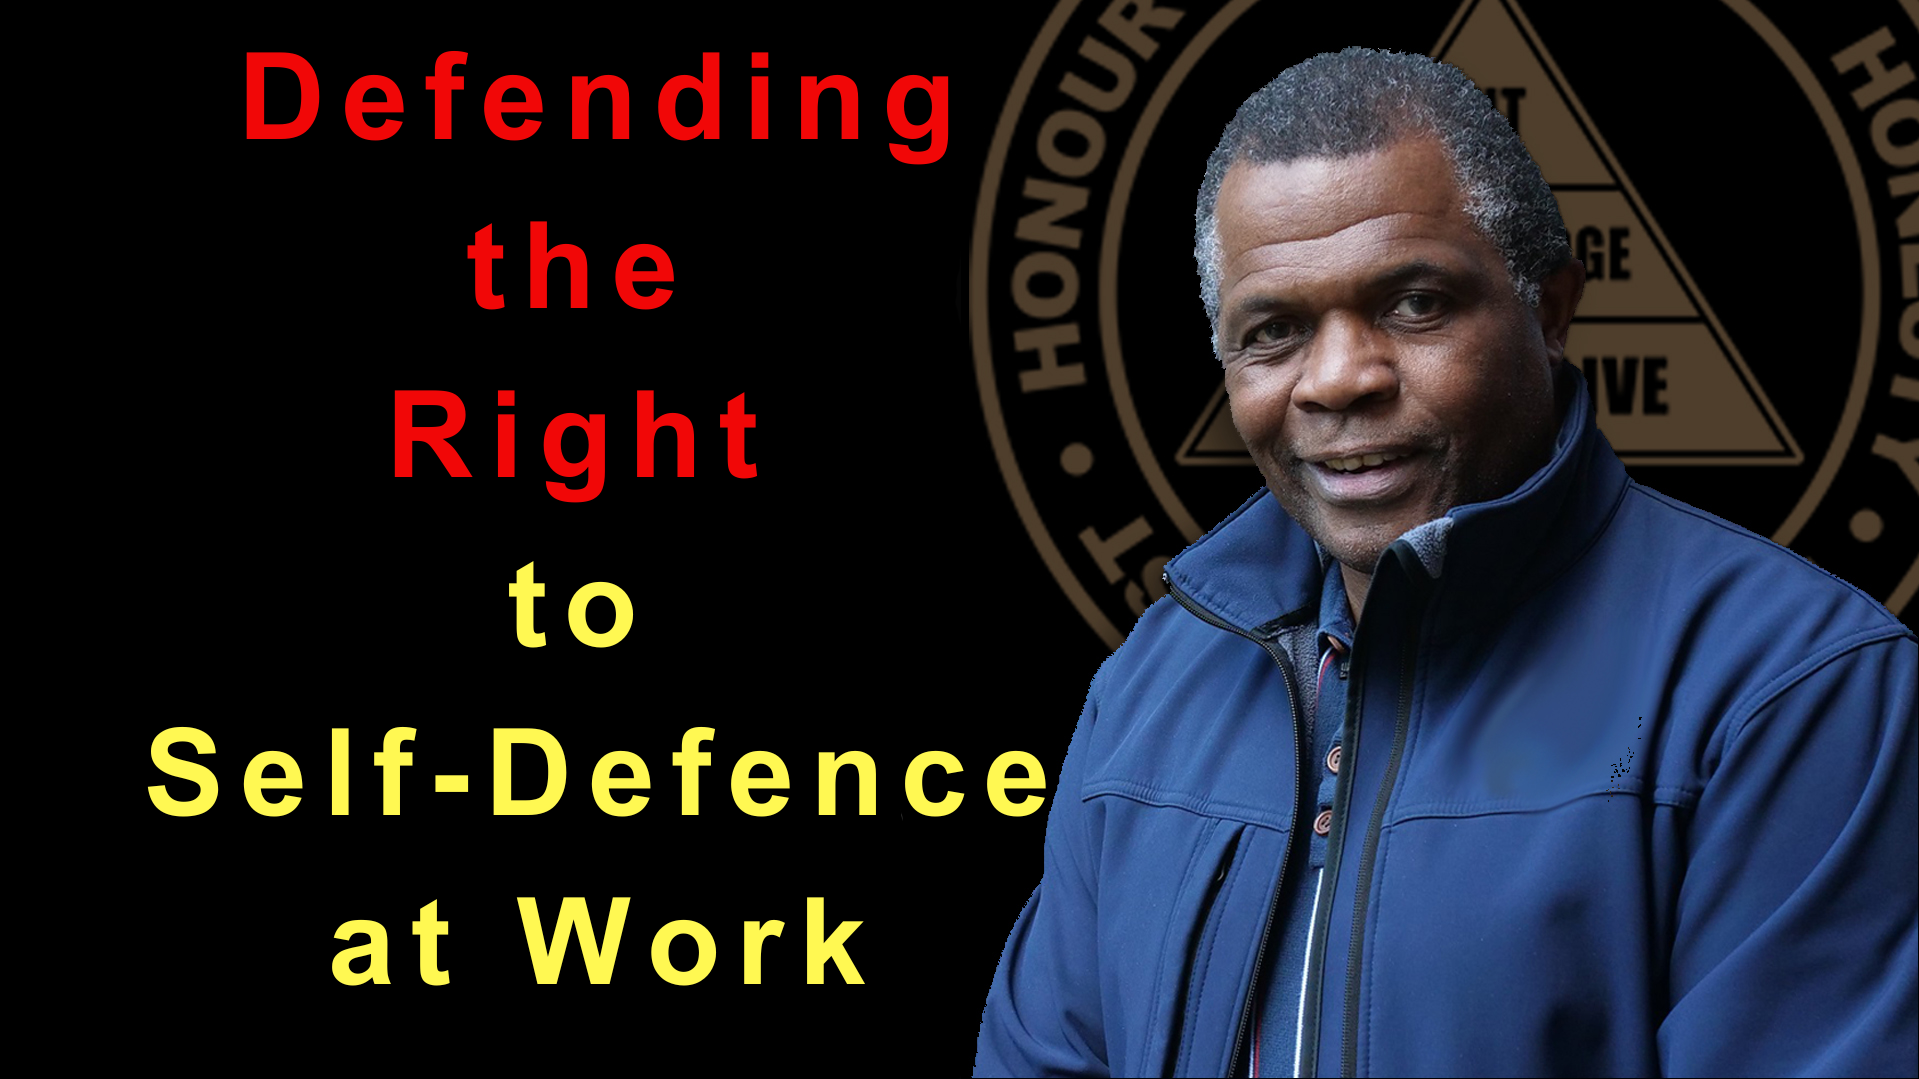 Defending the Right to Self-Defence at Work - NFPS Ltd